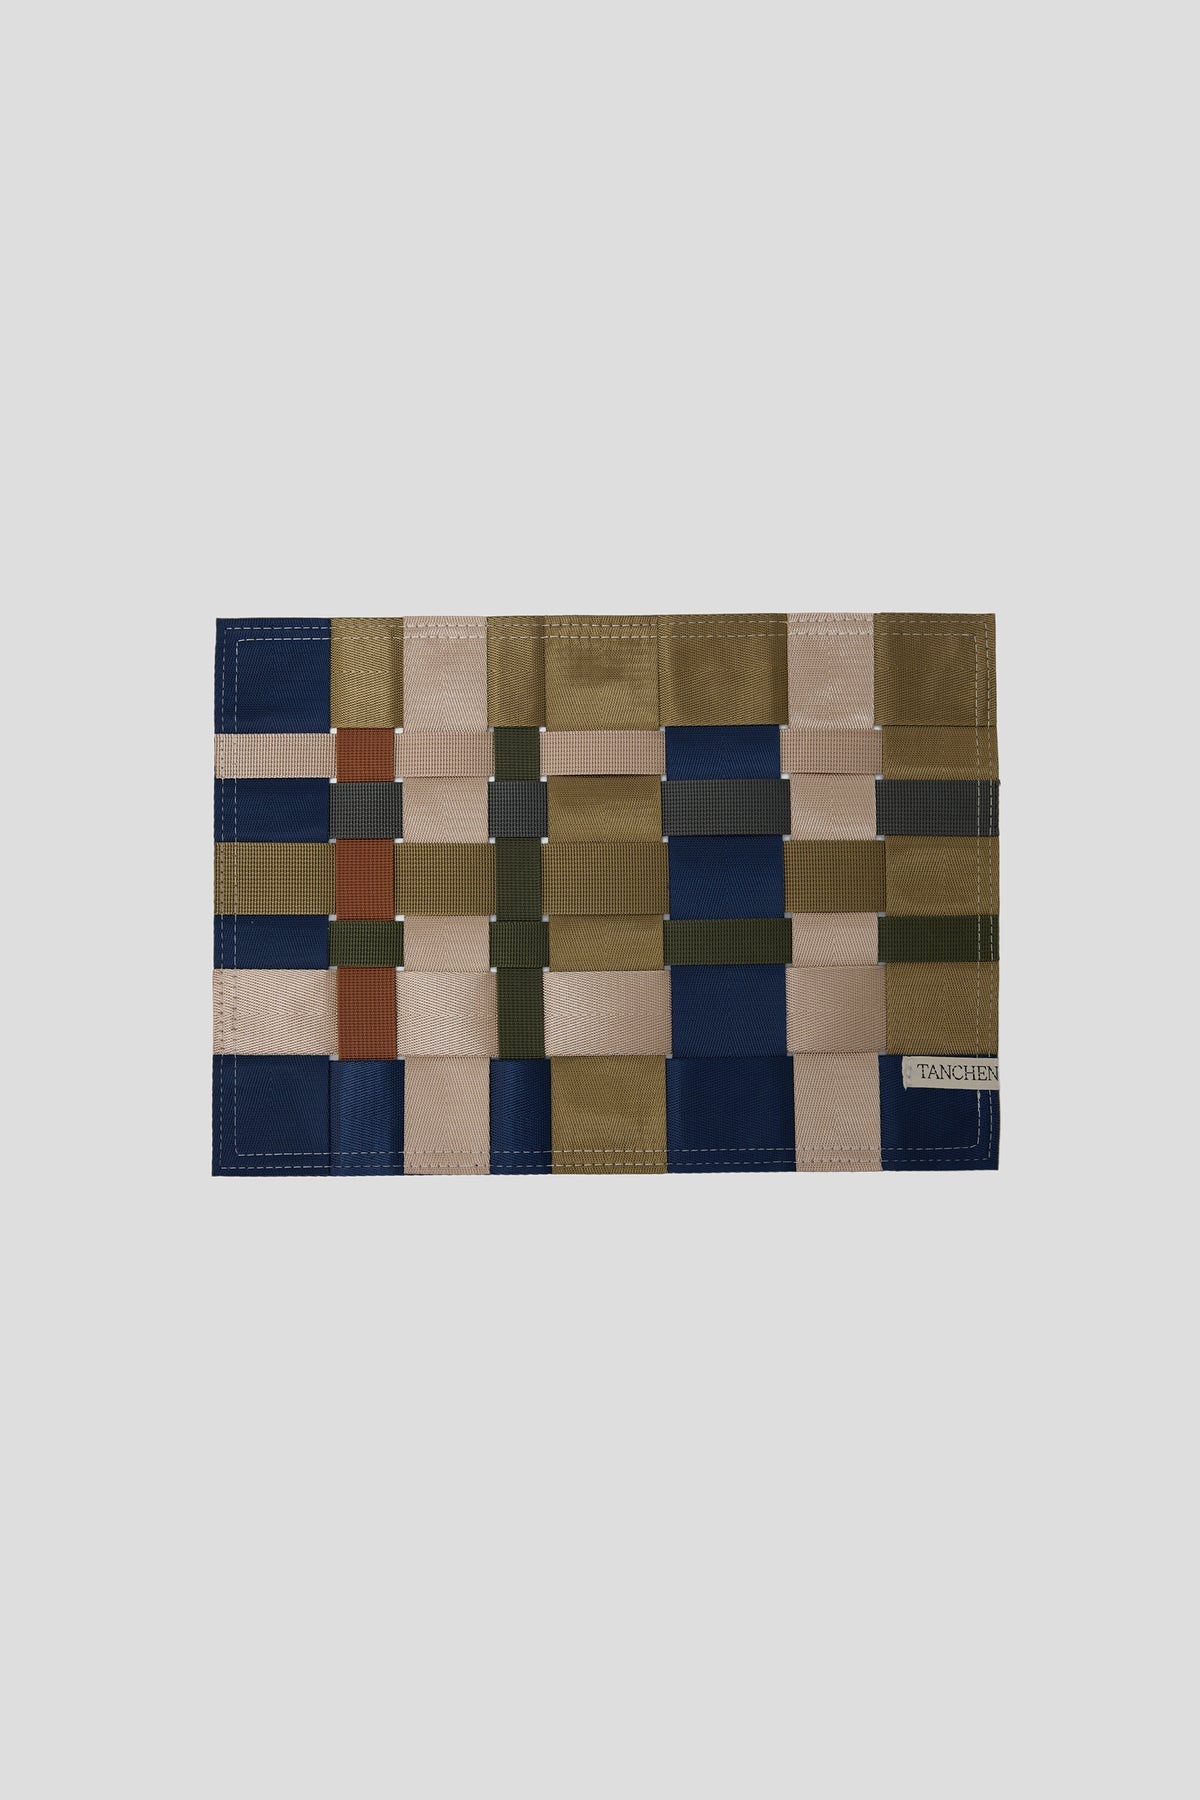 TANCHEN - R/R Placemat Navy